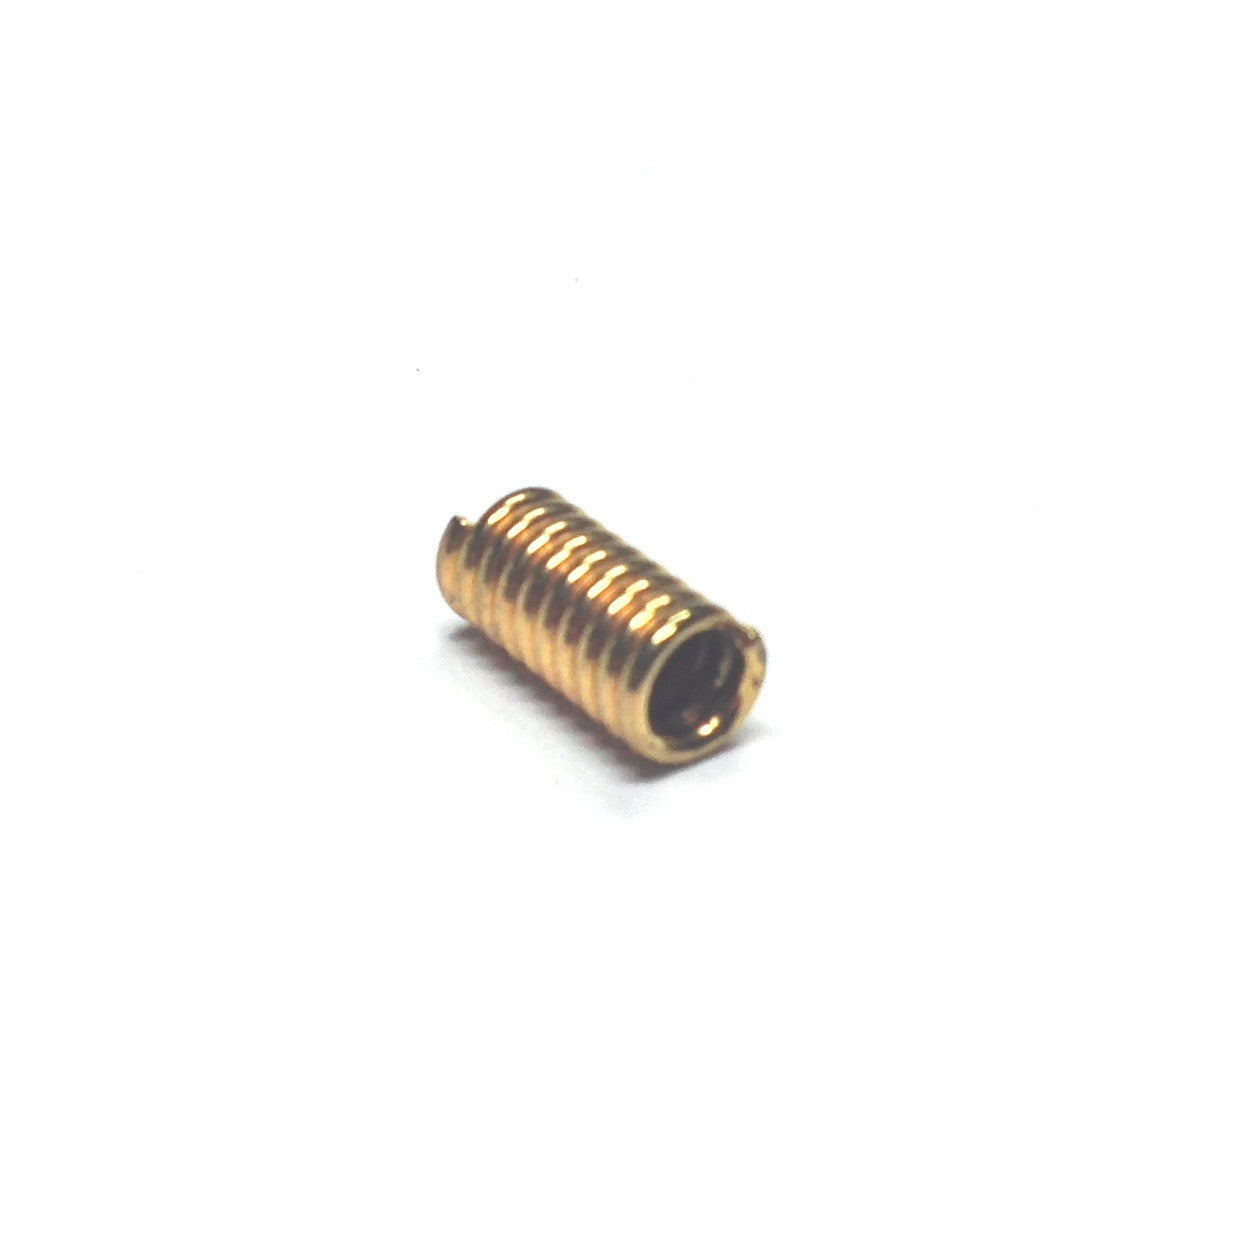 6X4MM Goldtone Spring With 2MM Hole (144 pieces)